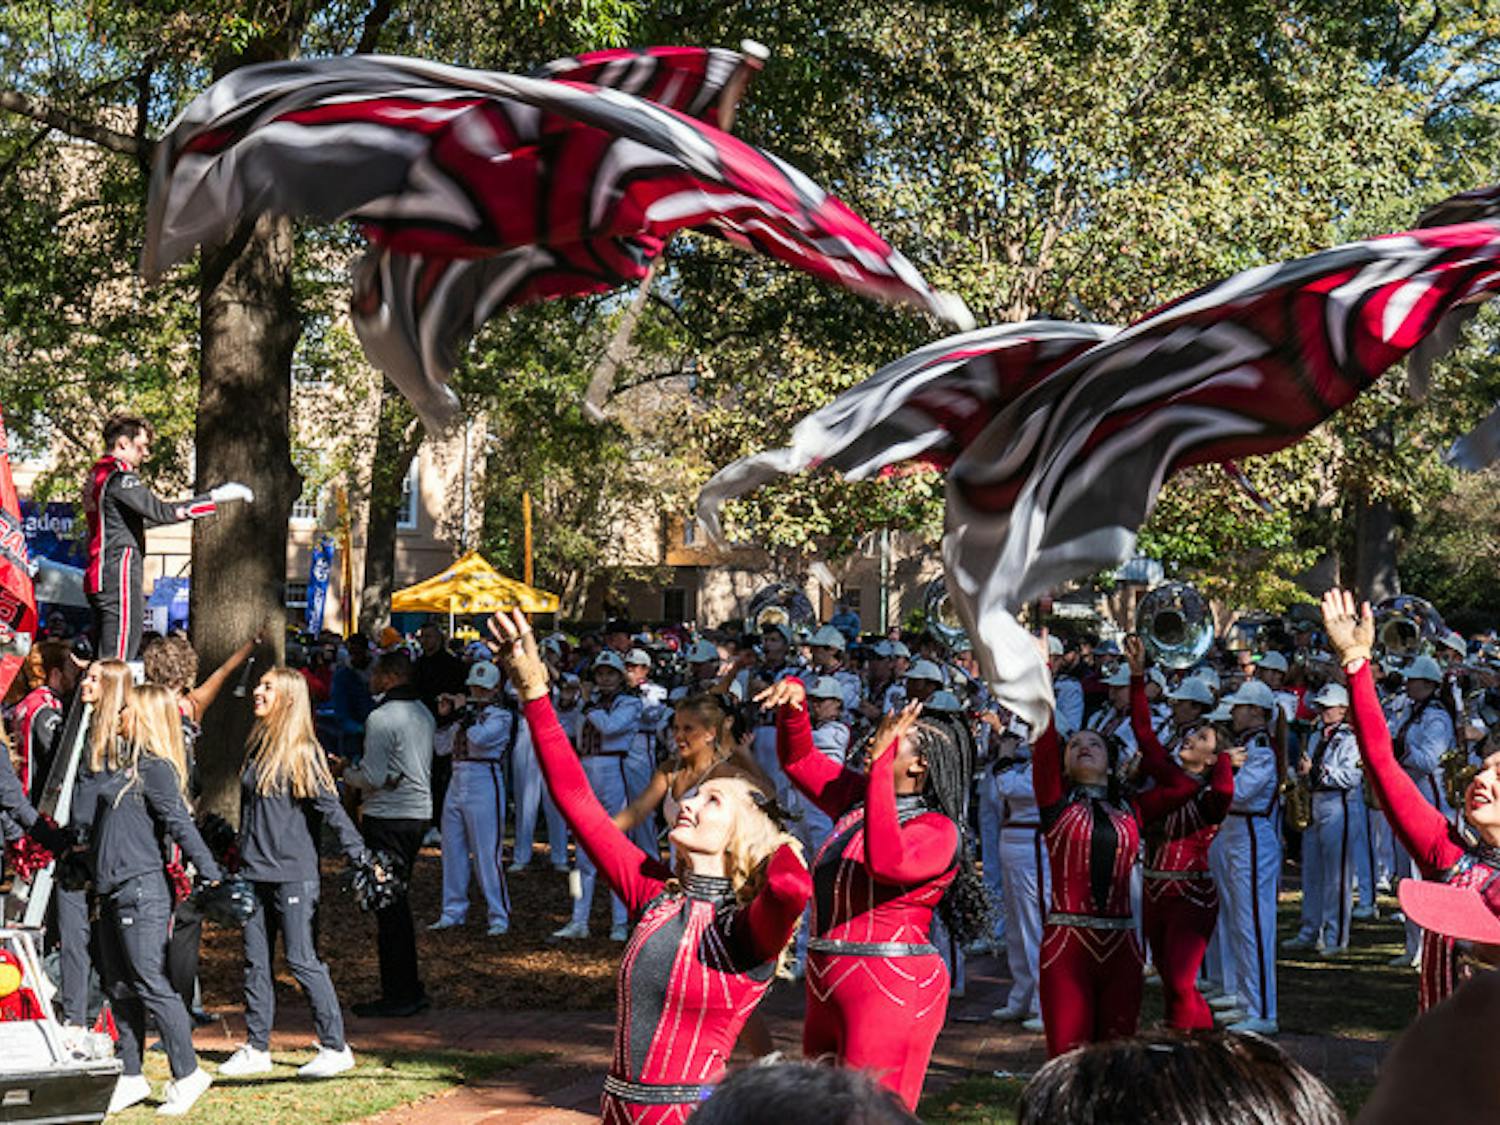 The USC color guard and band perform during the SEC Nation morning show on Nov. 19, 2022 at the Horseshoe. The show covered the upcoming games from across the SEC.